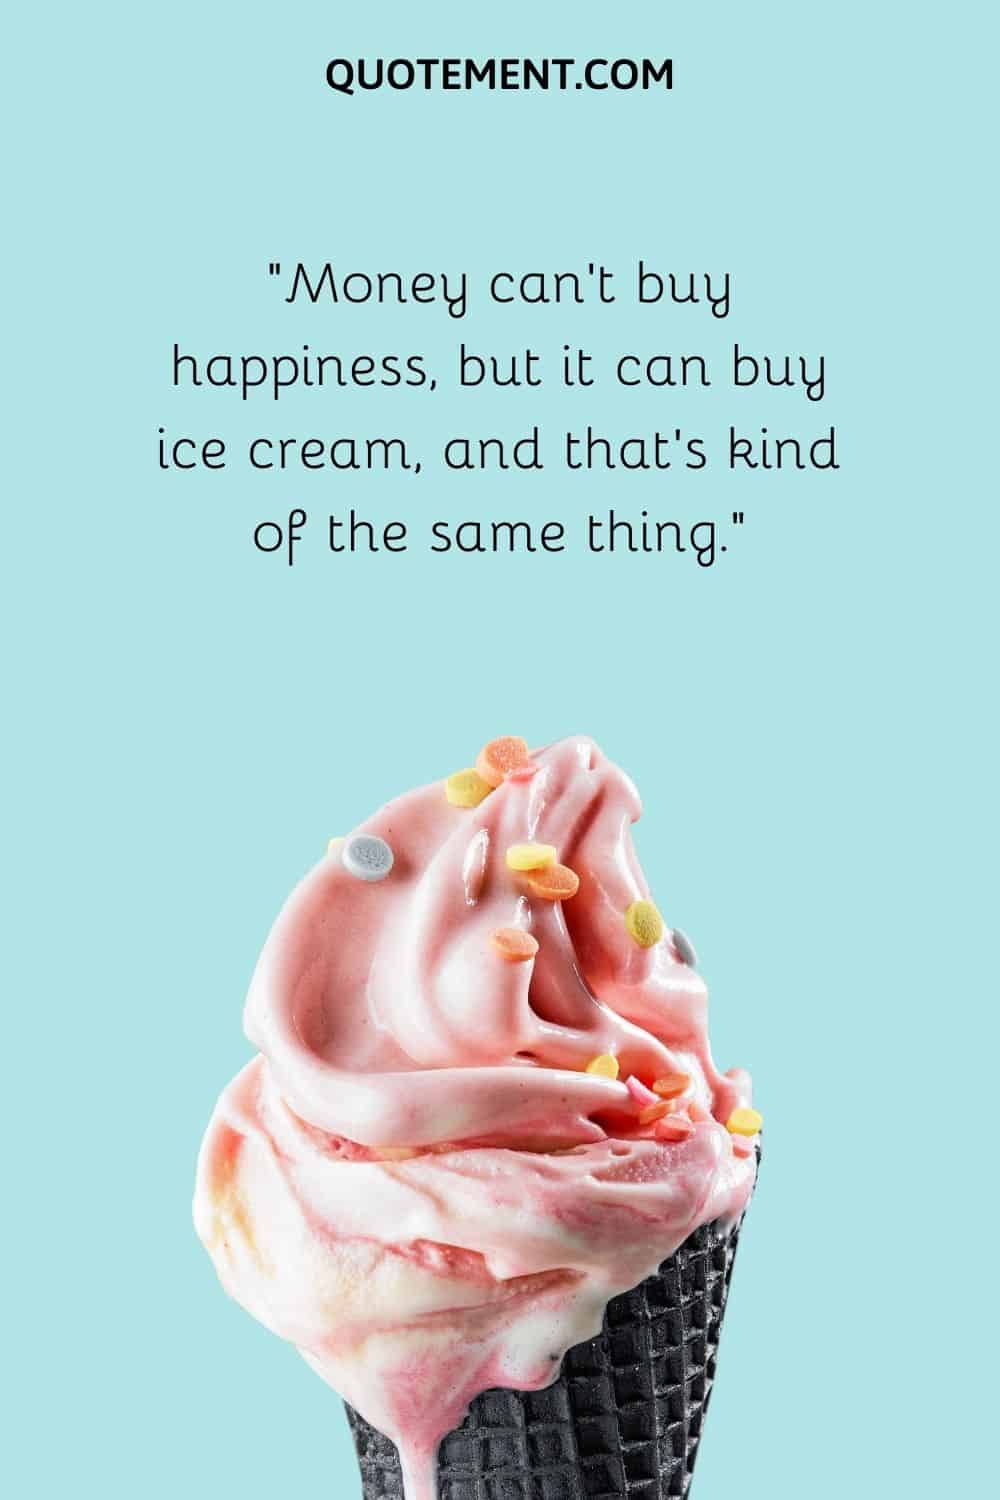 Money can't buy happiness, but it can buy ice cream